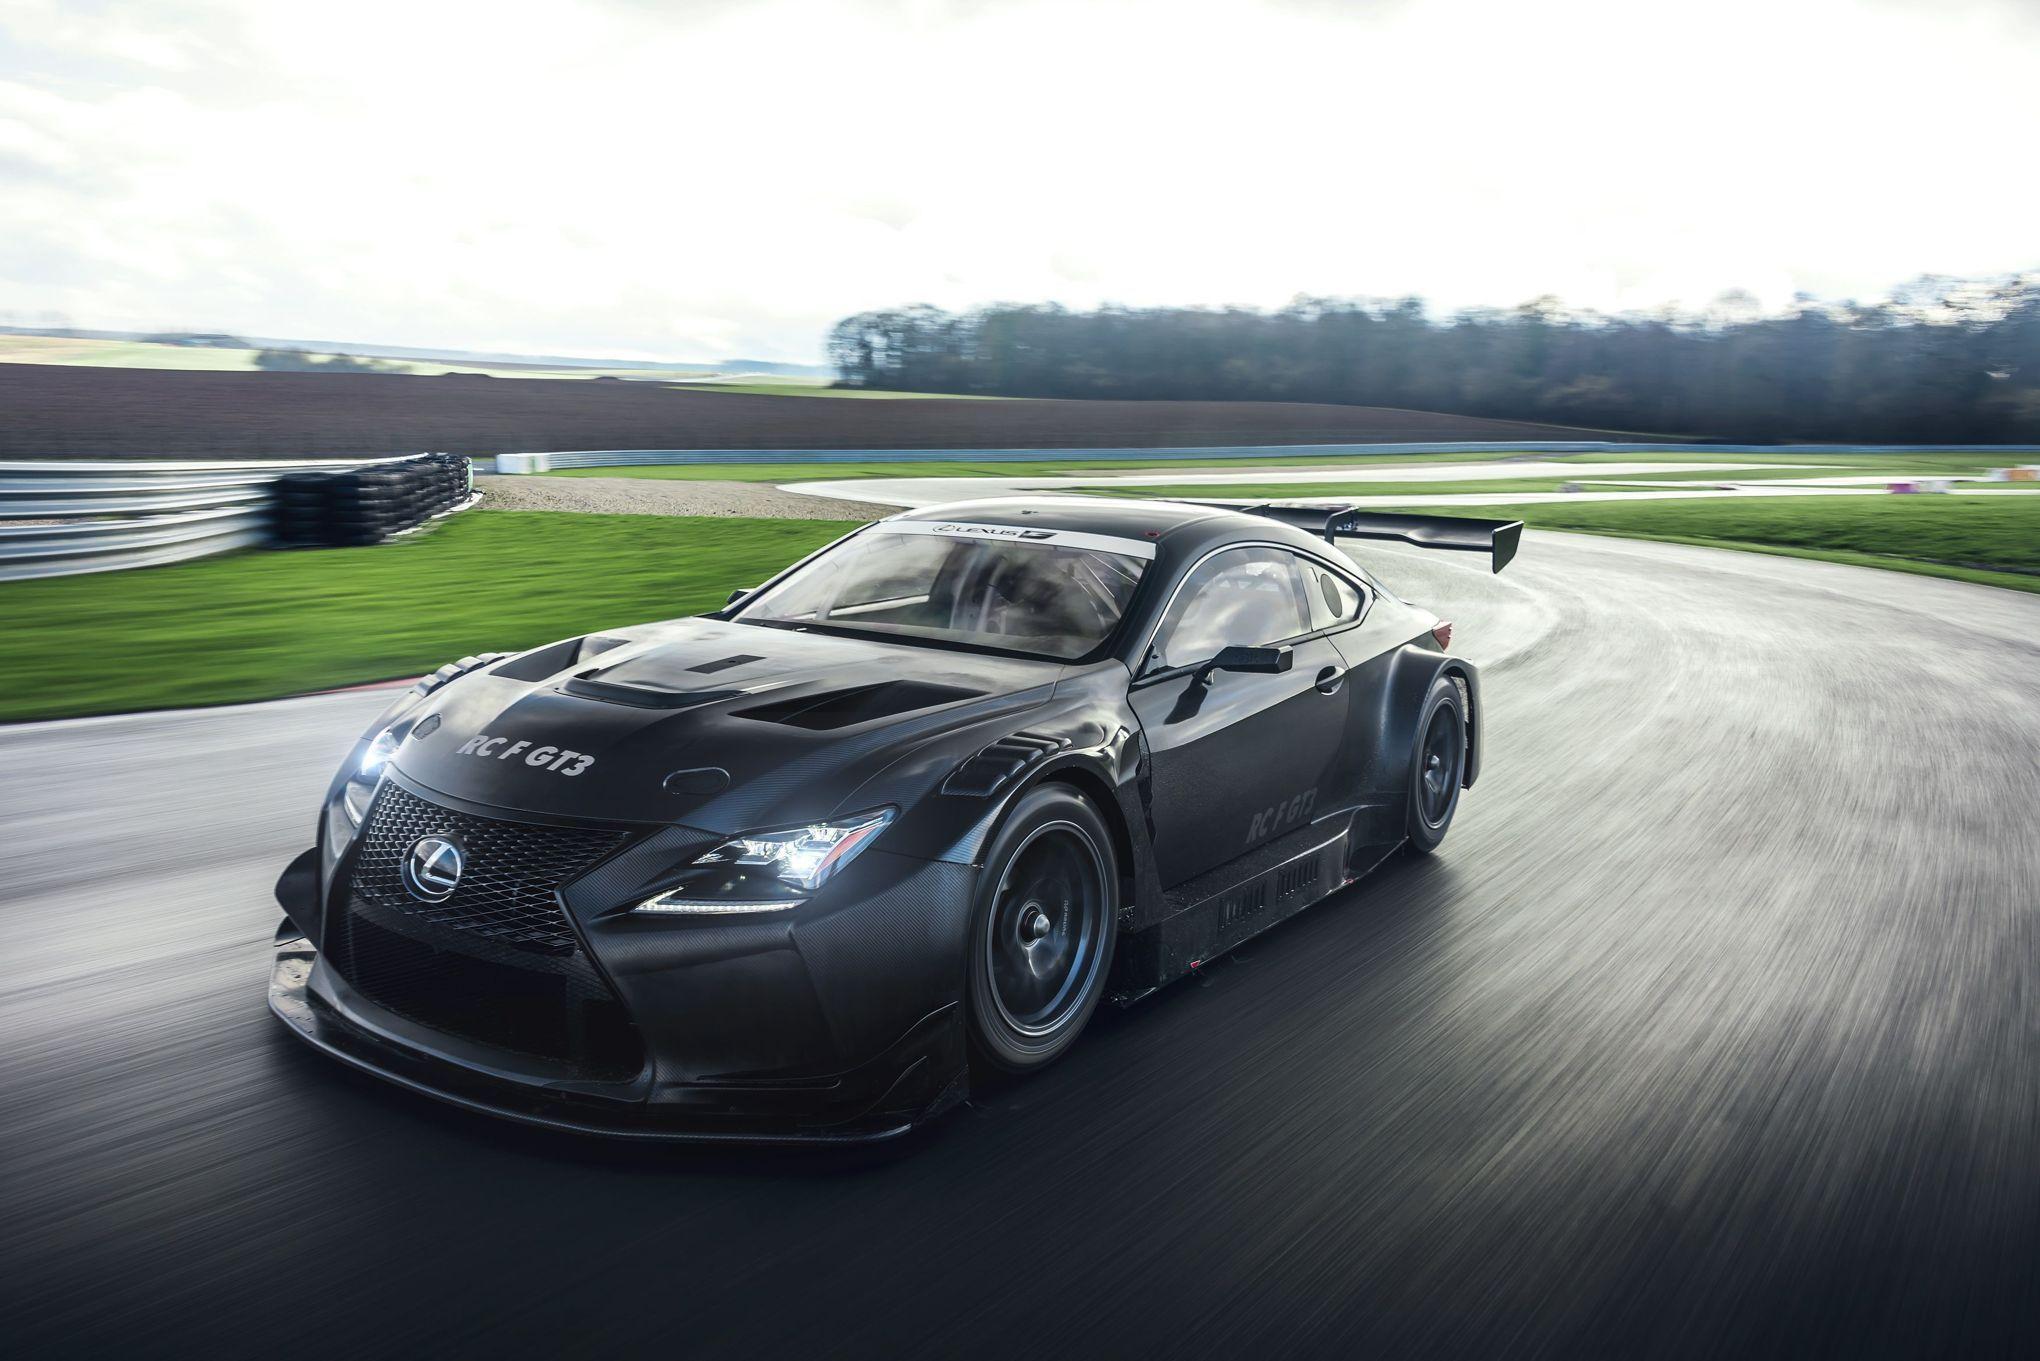 Lexus Has An All New Racing Car. Behold The RC F GT3. Gt Cars, Cars